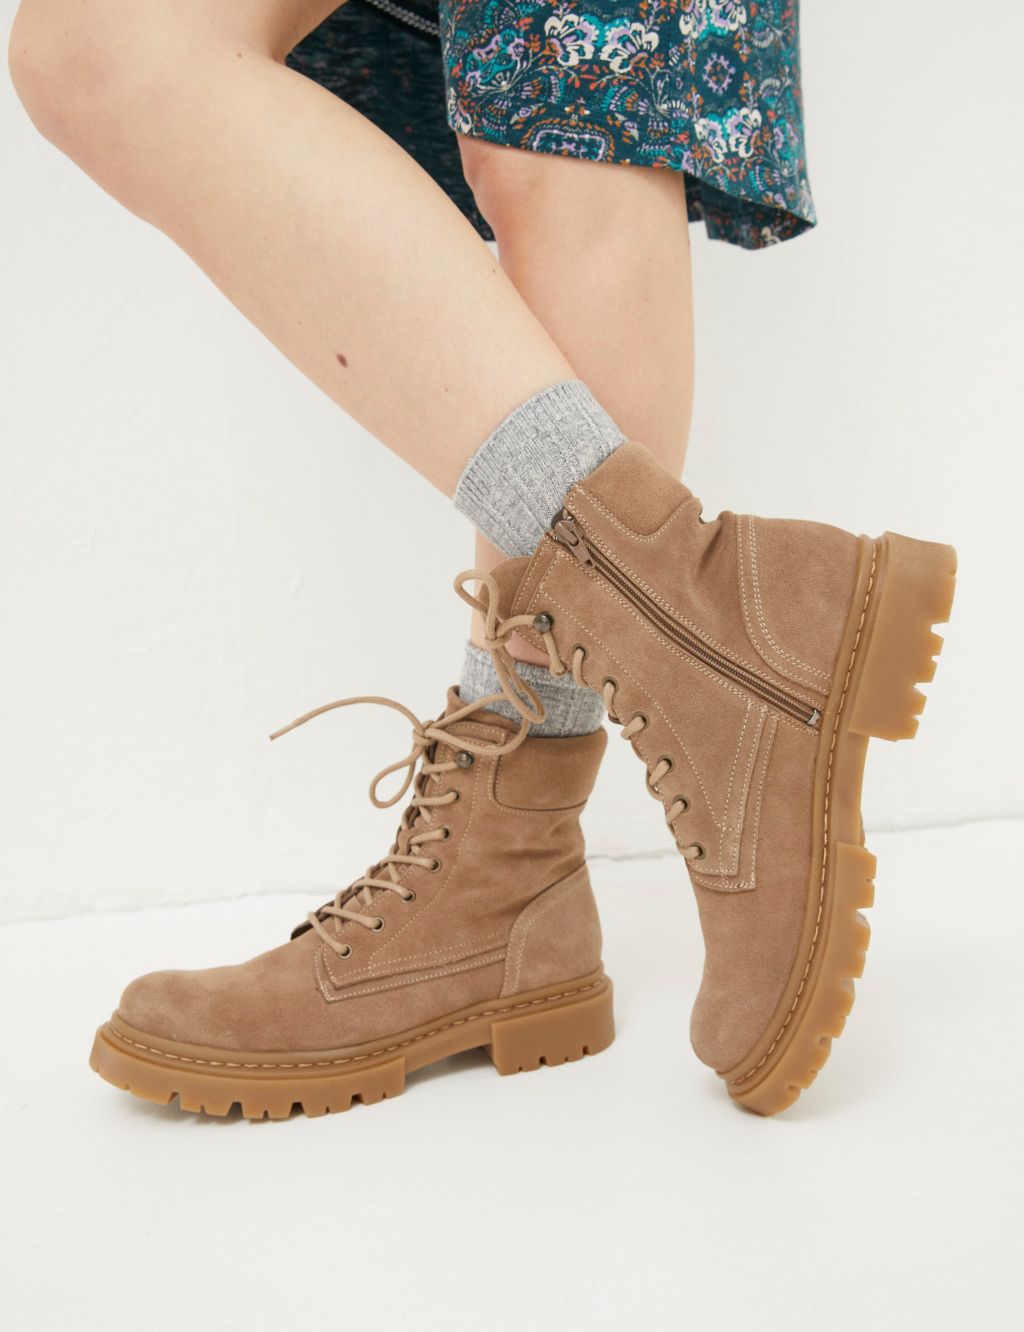 Suede Hiker Ankle Boots image 5